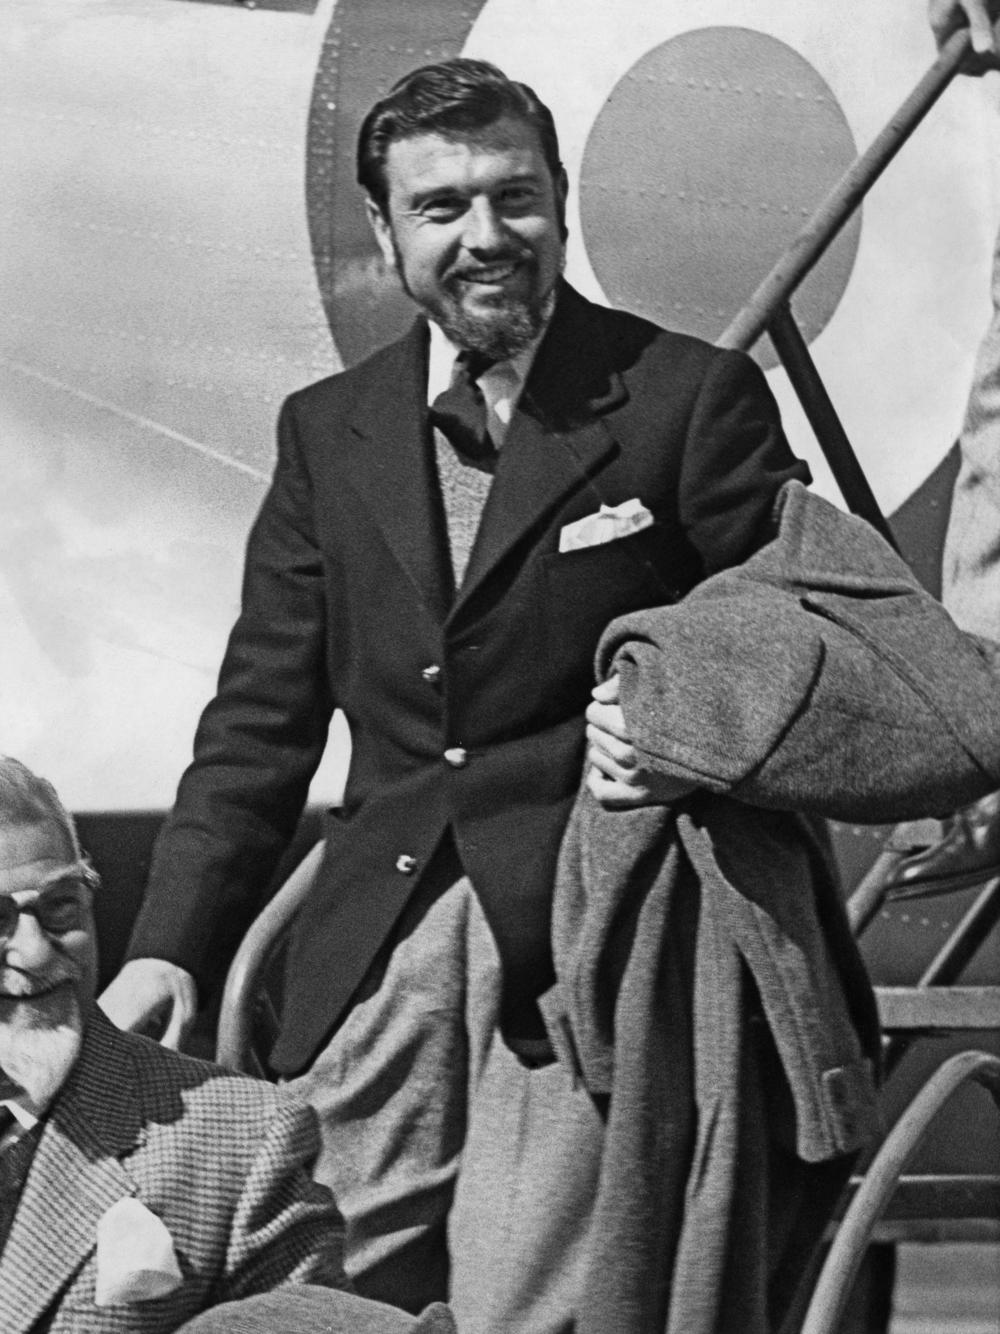 Blake arrives at what was then Royal Air Force Abingdon in Oxfordshire, England, after his release from North Korea in 1953. He became a double agent in service of the KGB.